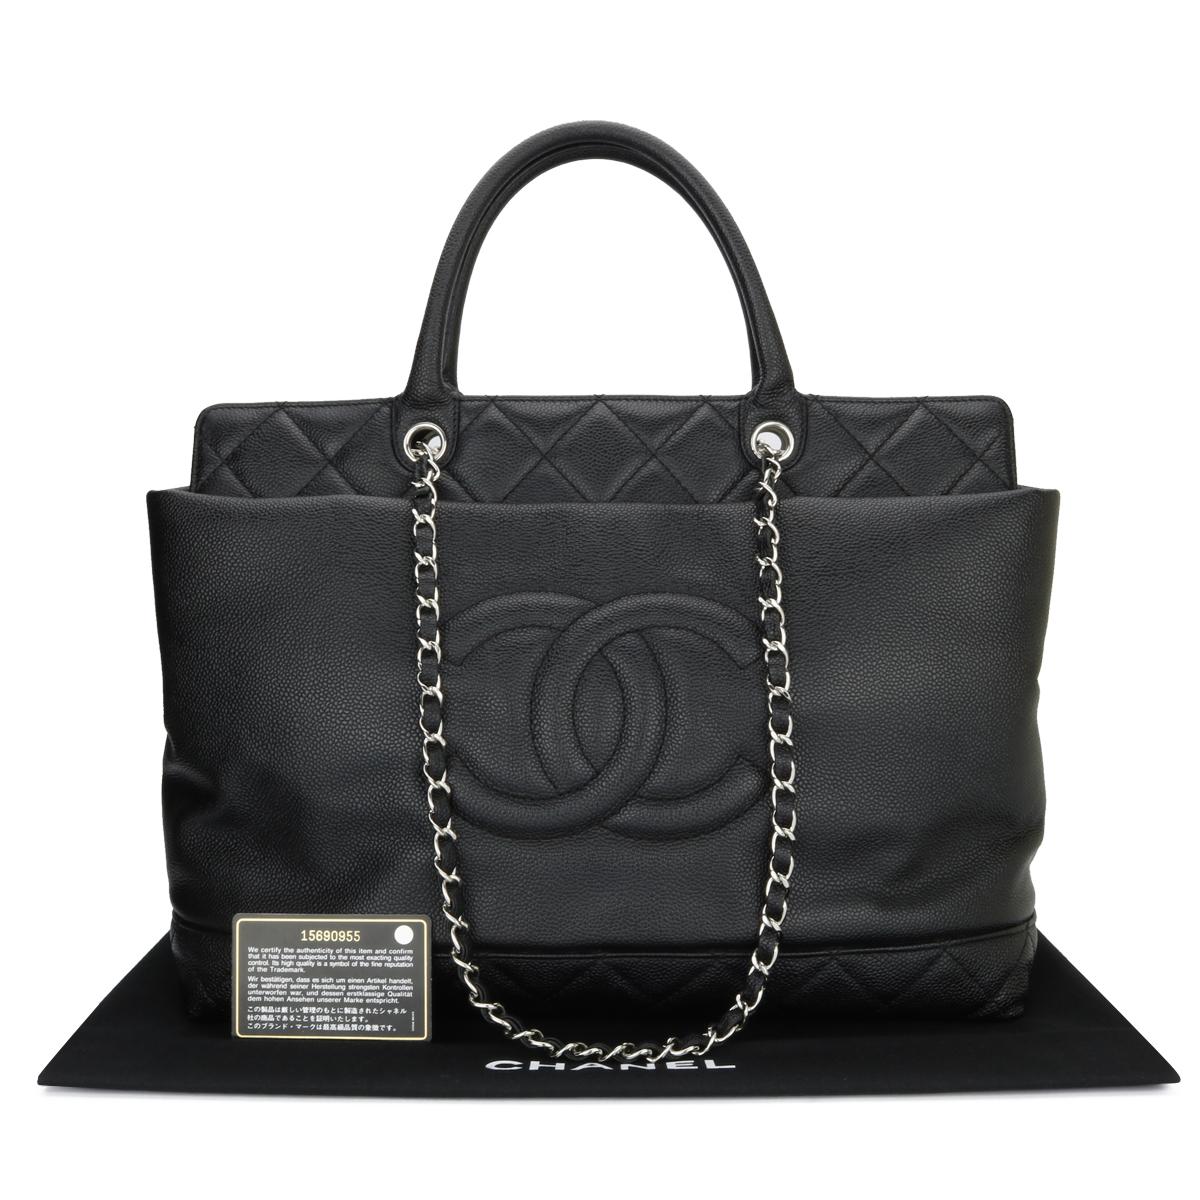 CHANEL Large Shopping Tote Black Caviar with Silver Hardware 2011.

This bag is in excellent condition, the bag still holds its shape quite well, and the hardware is still shiny.

This shopping tote is very versatile, and it can be carried by hand